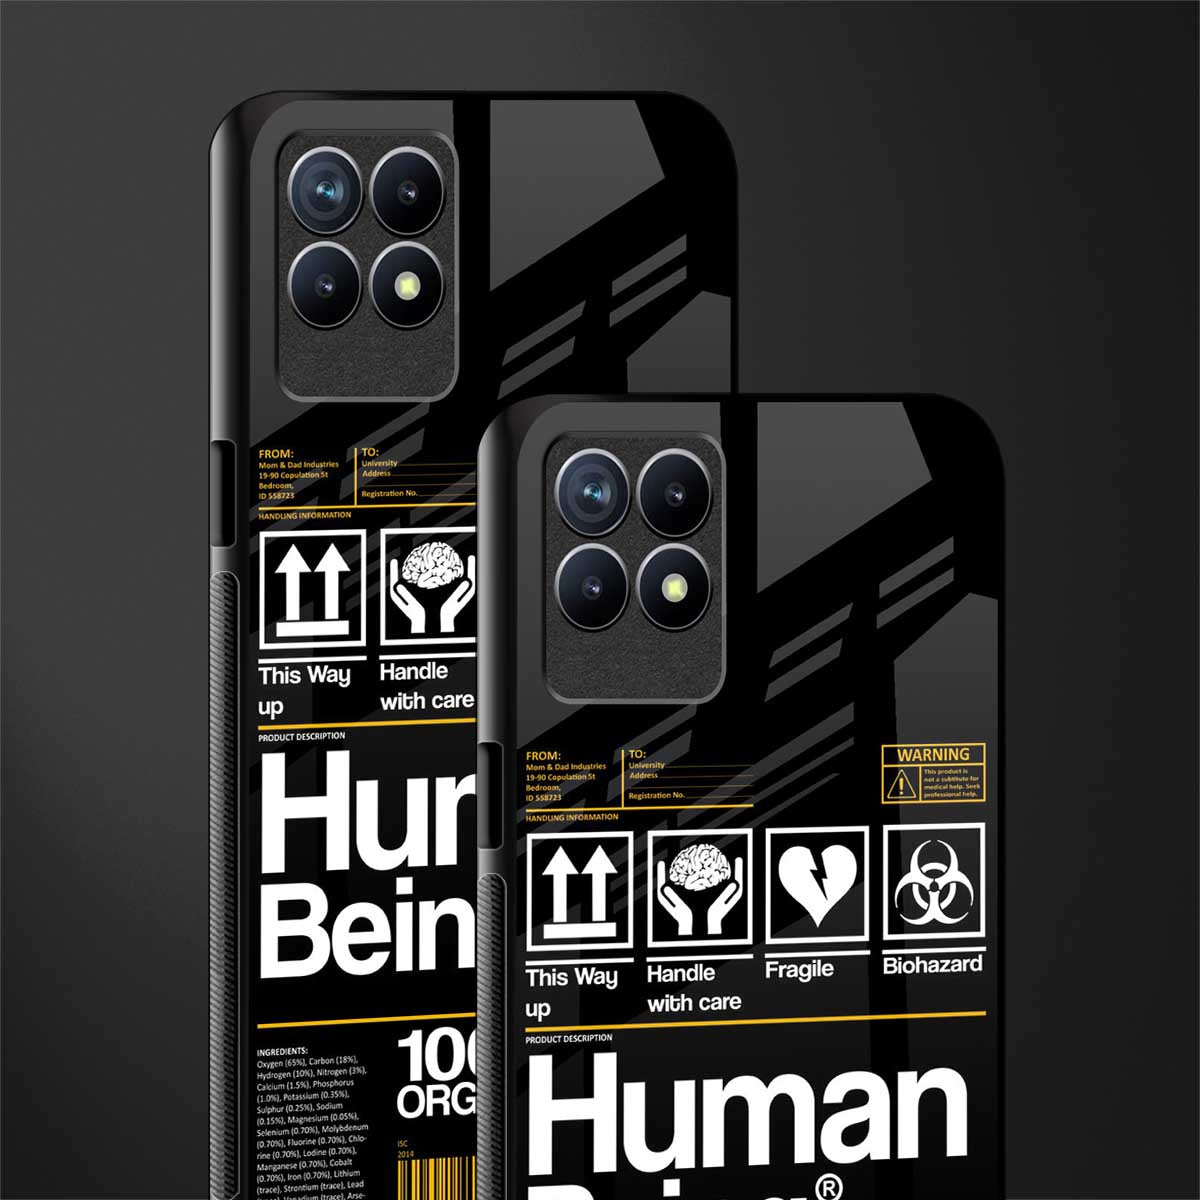 human being label phone cover for realme 8i